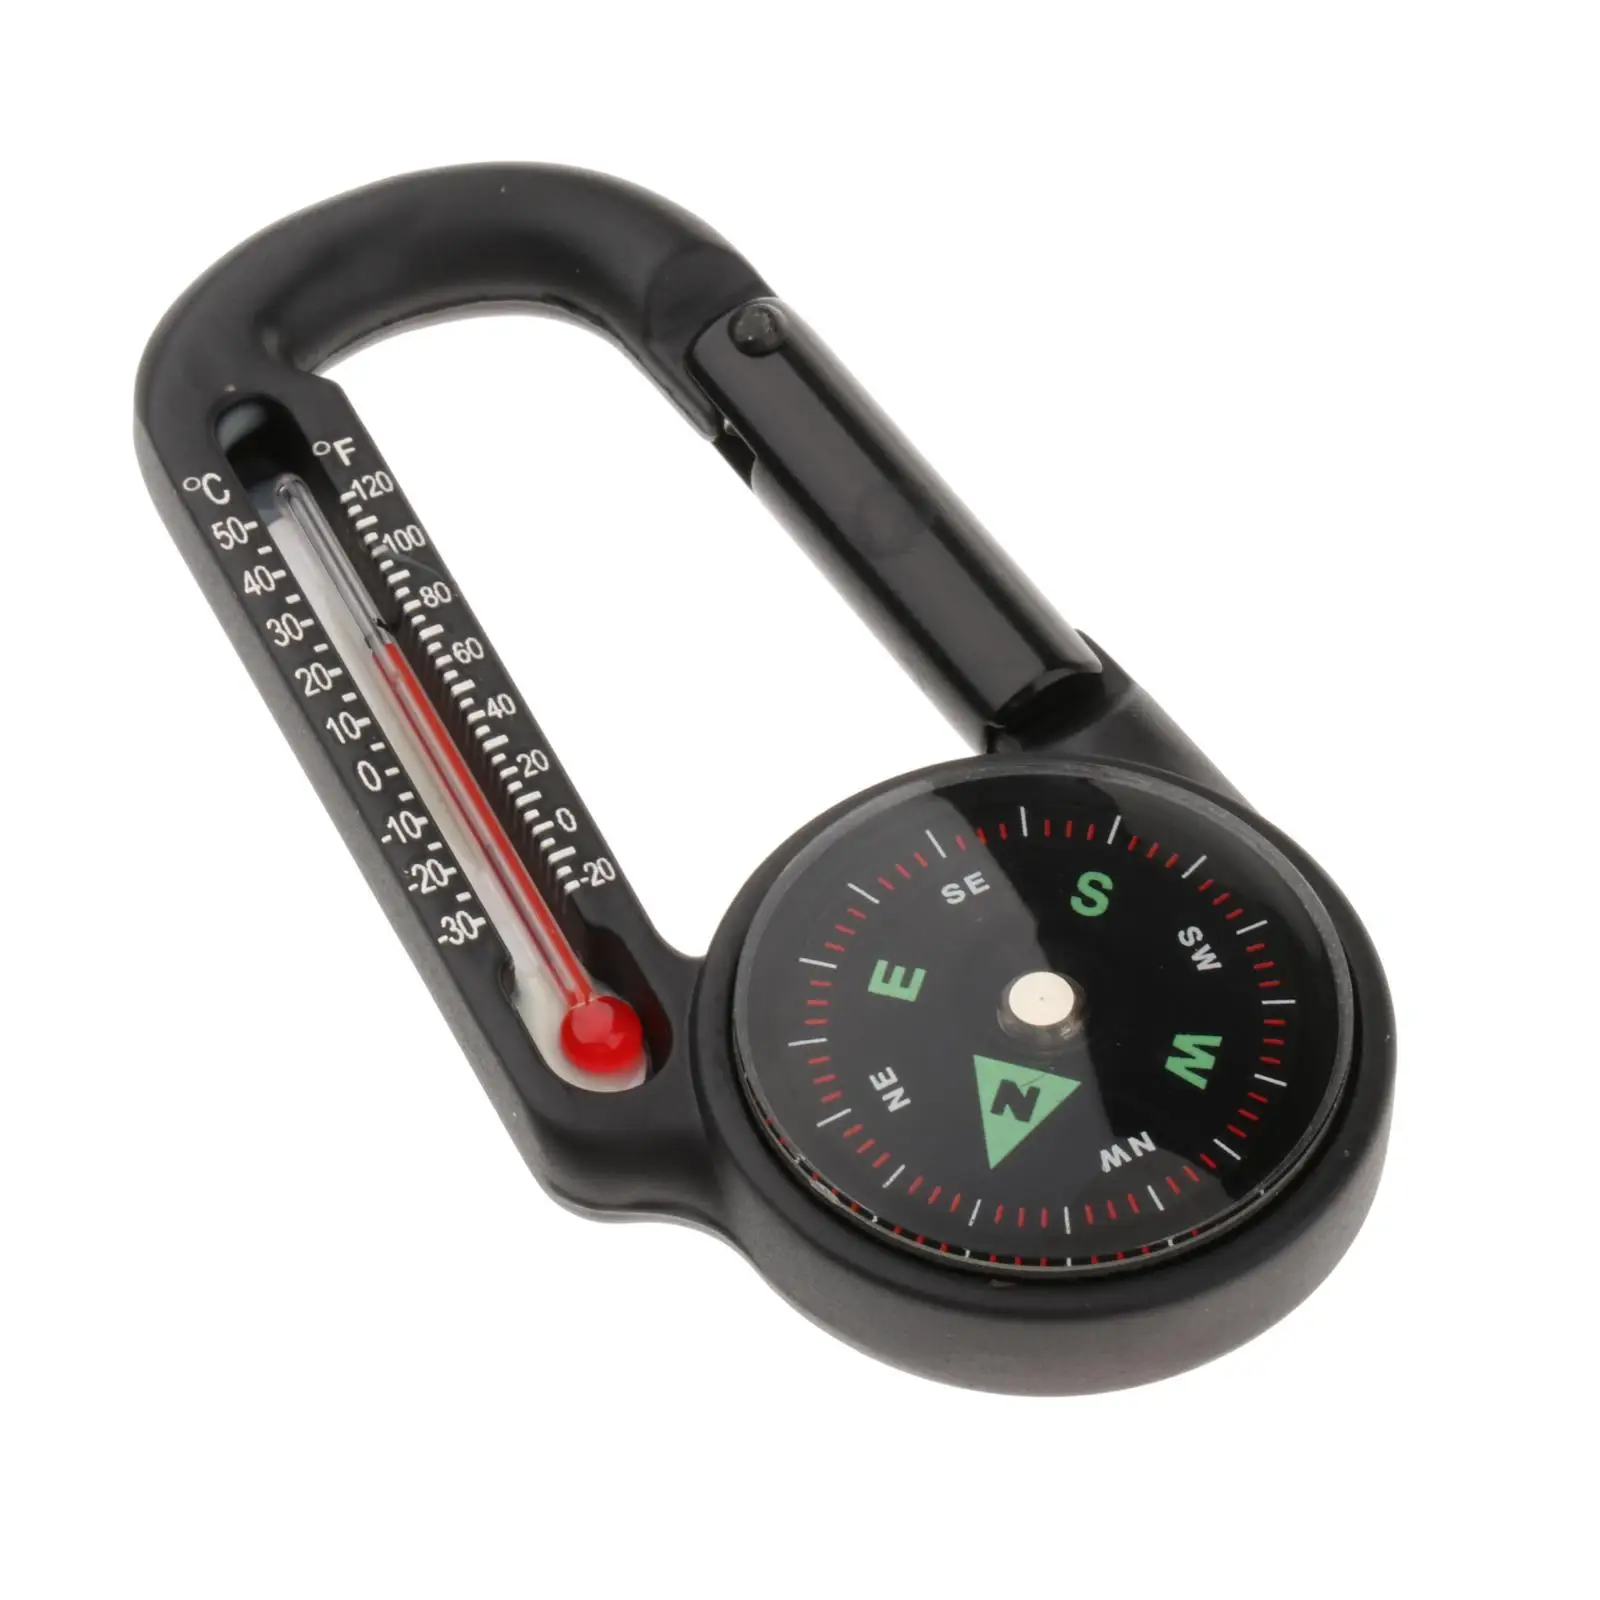 Compass Thermometer Outdoor Hiking Tactical Survival Key Ring Carabiner Y0U5 